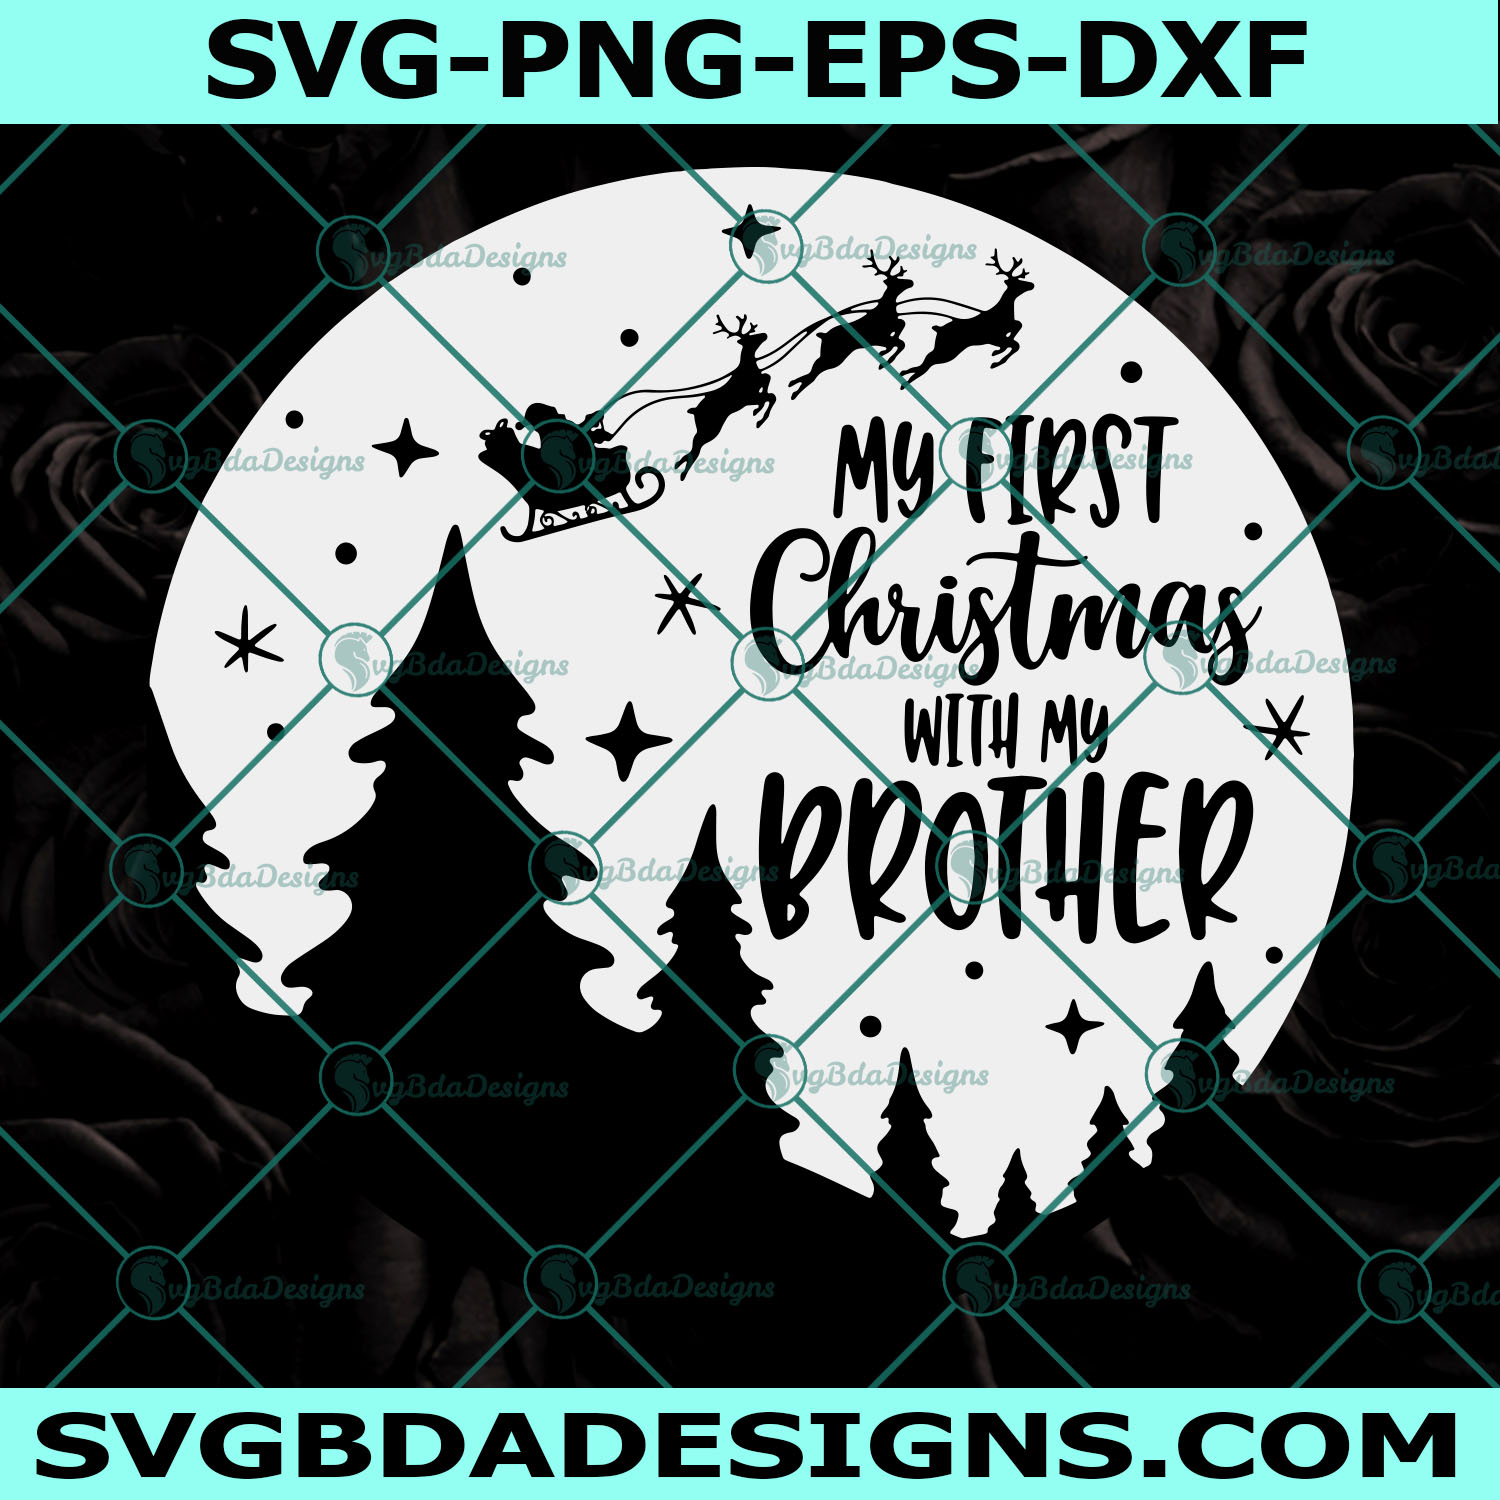 My First Christmas with my Brother svg, Merry Christmas svg, Christmas Scene svg, Santa's Sleigh svg, Digital Download